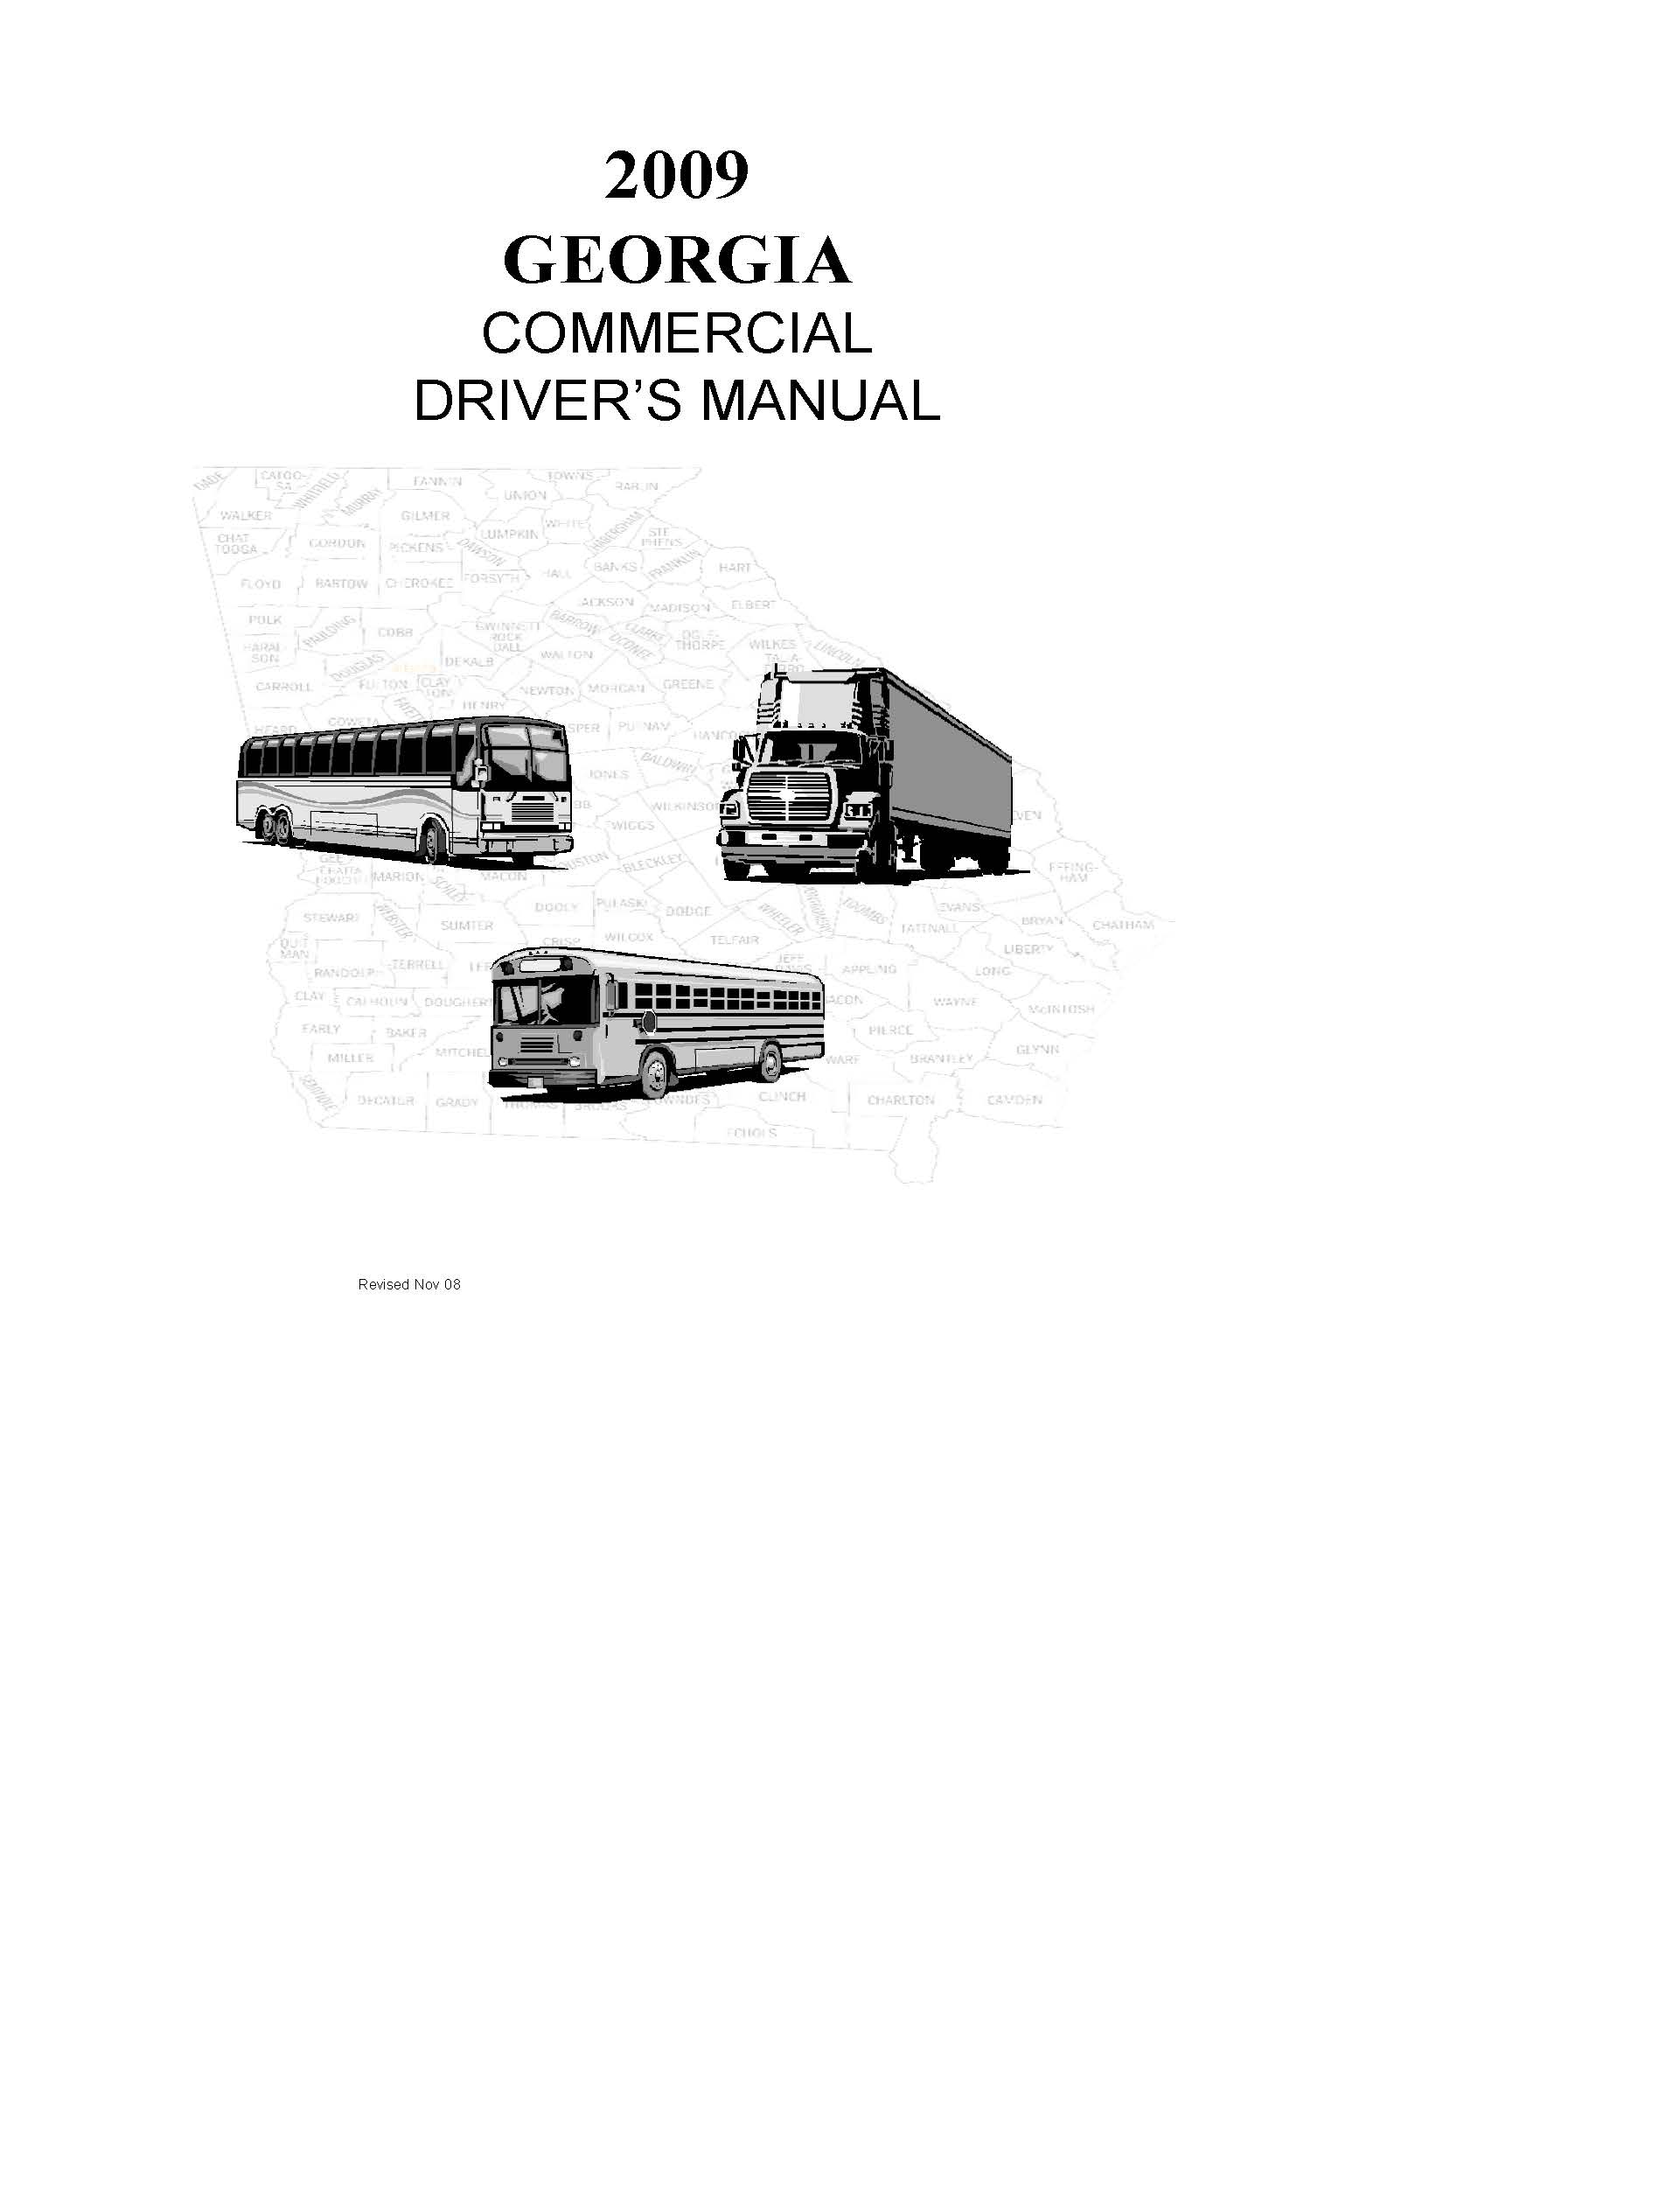 Georgia Commercial Drivers License Manual 2009 The Girards Law Firm